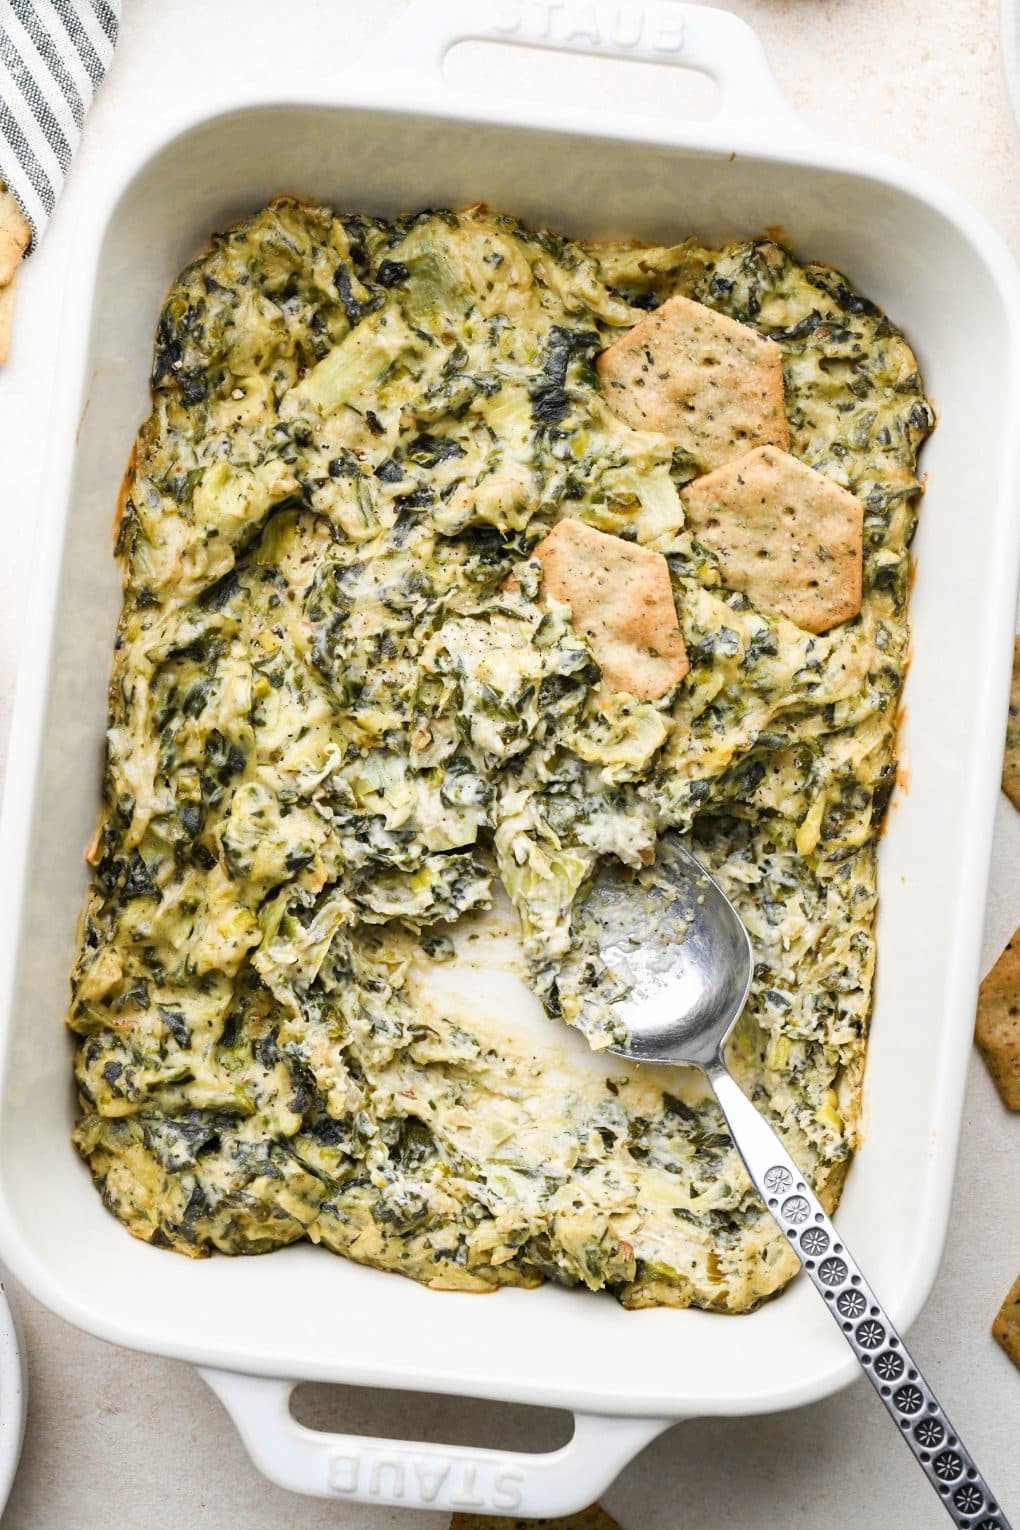 A small cream colored baking dish of baked dairy free spinach artichoke dip, with a spoon angled into the dish where some dip has been scooped out.